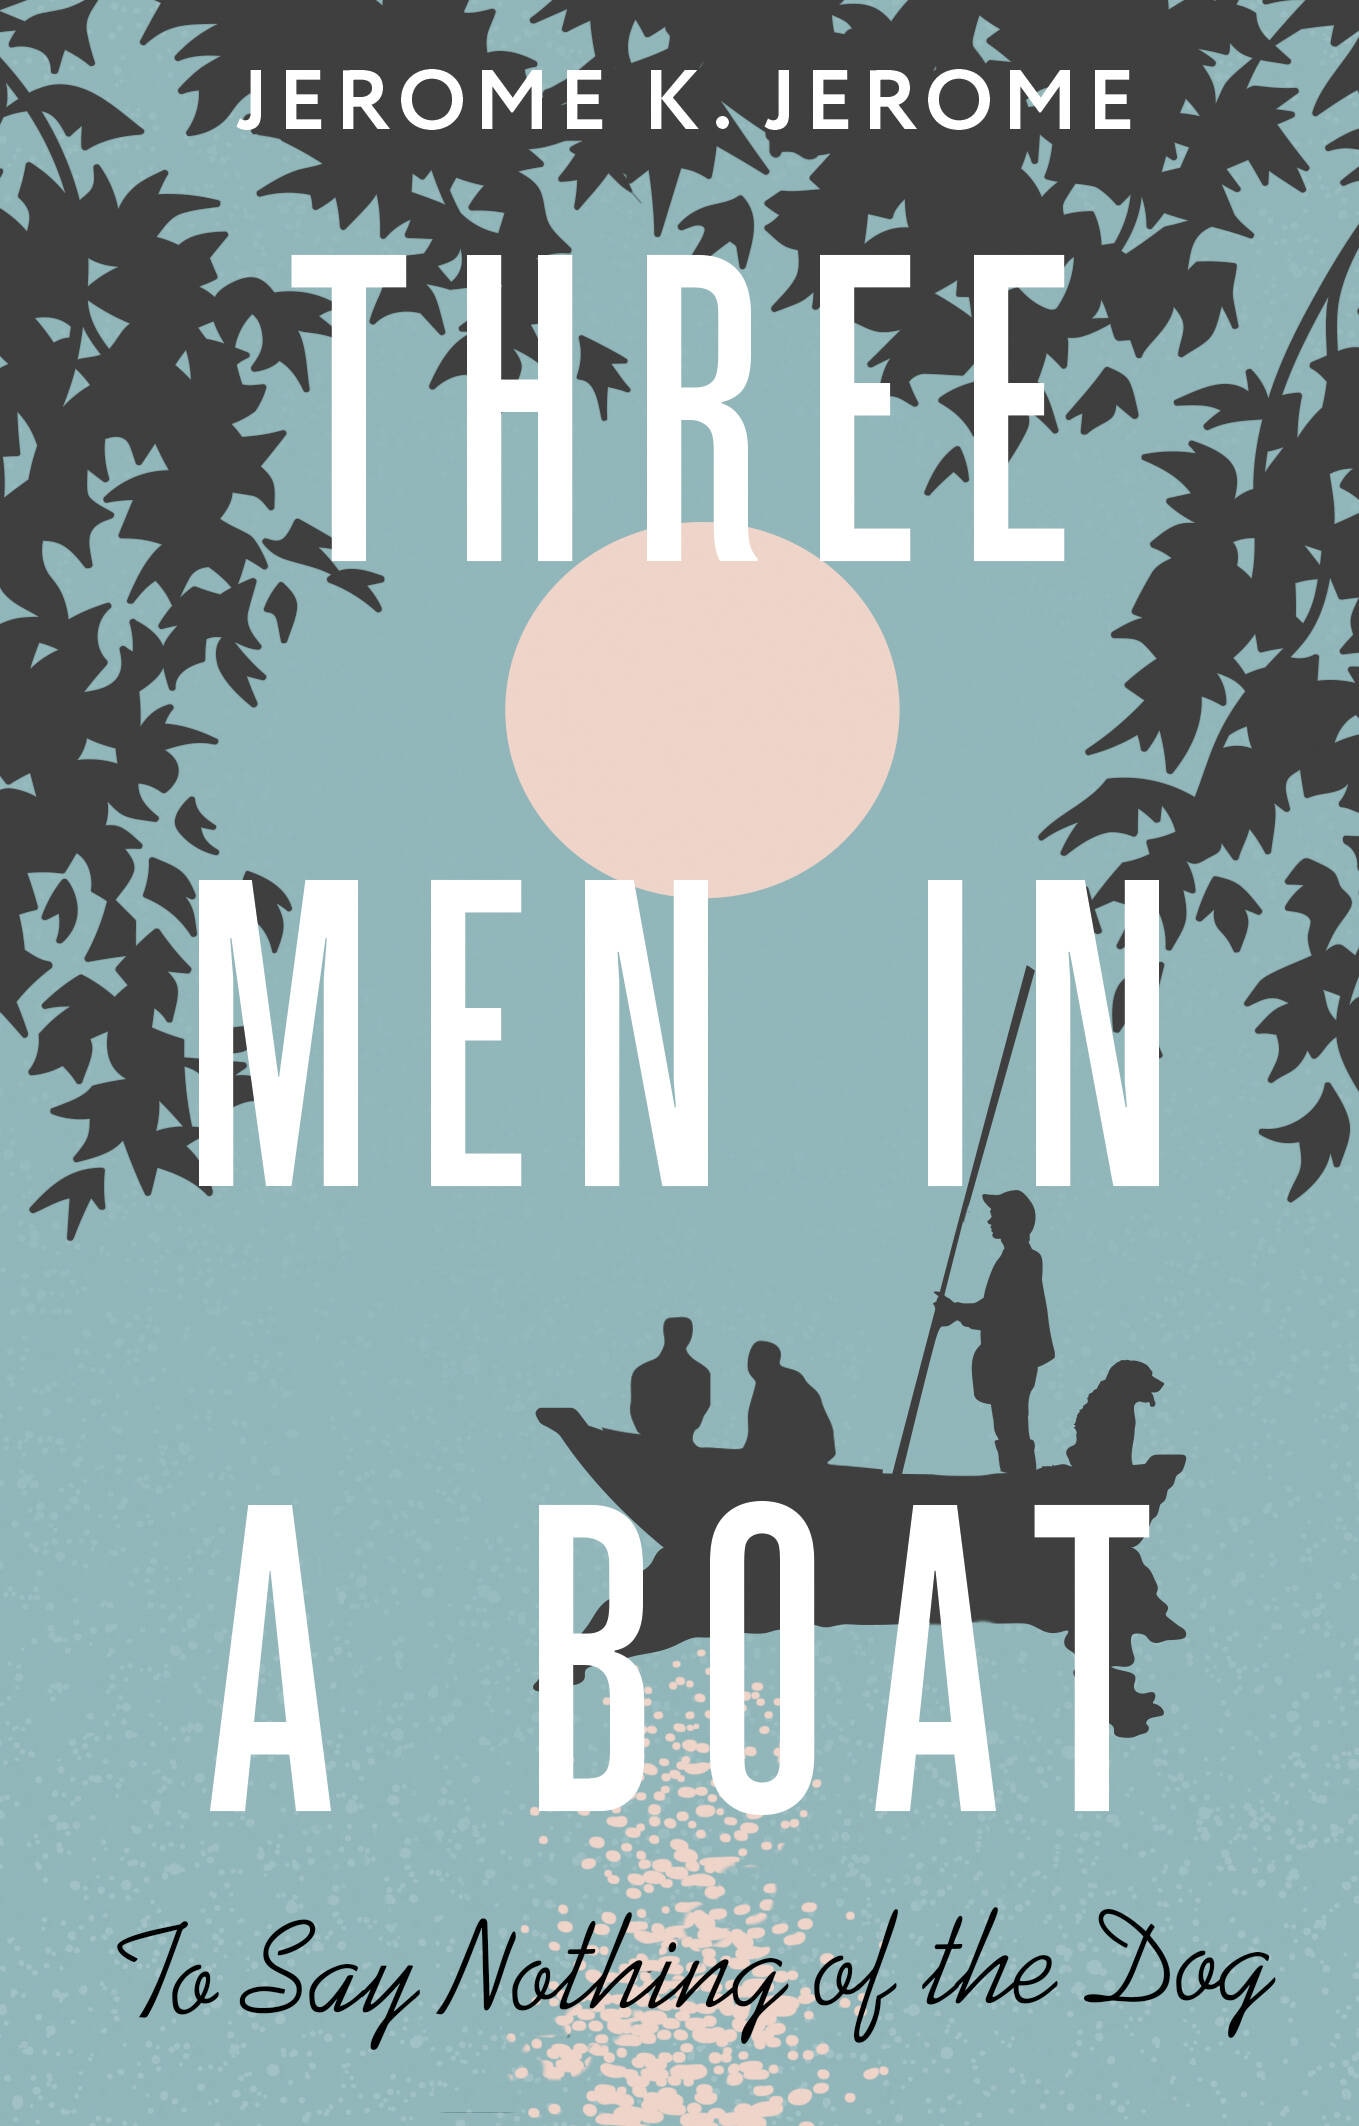 Book “Three Men in a Boat (To say Nothing of the Dog)” by Джером Клапка Джером — 2023